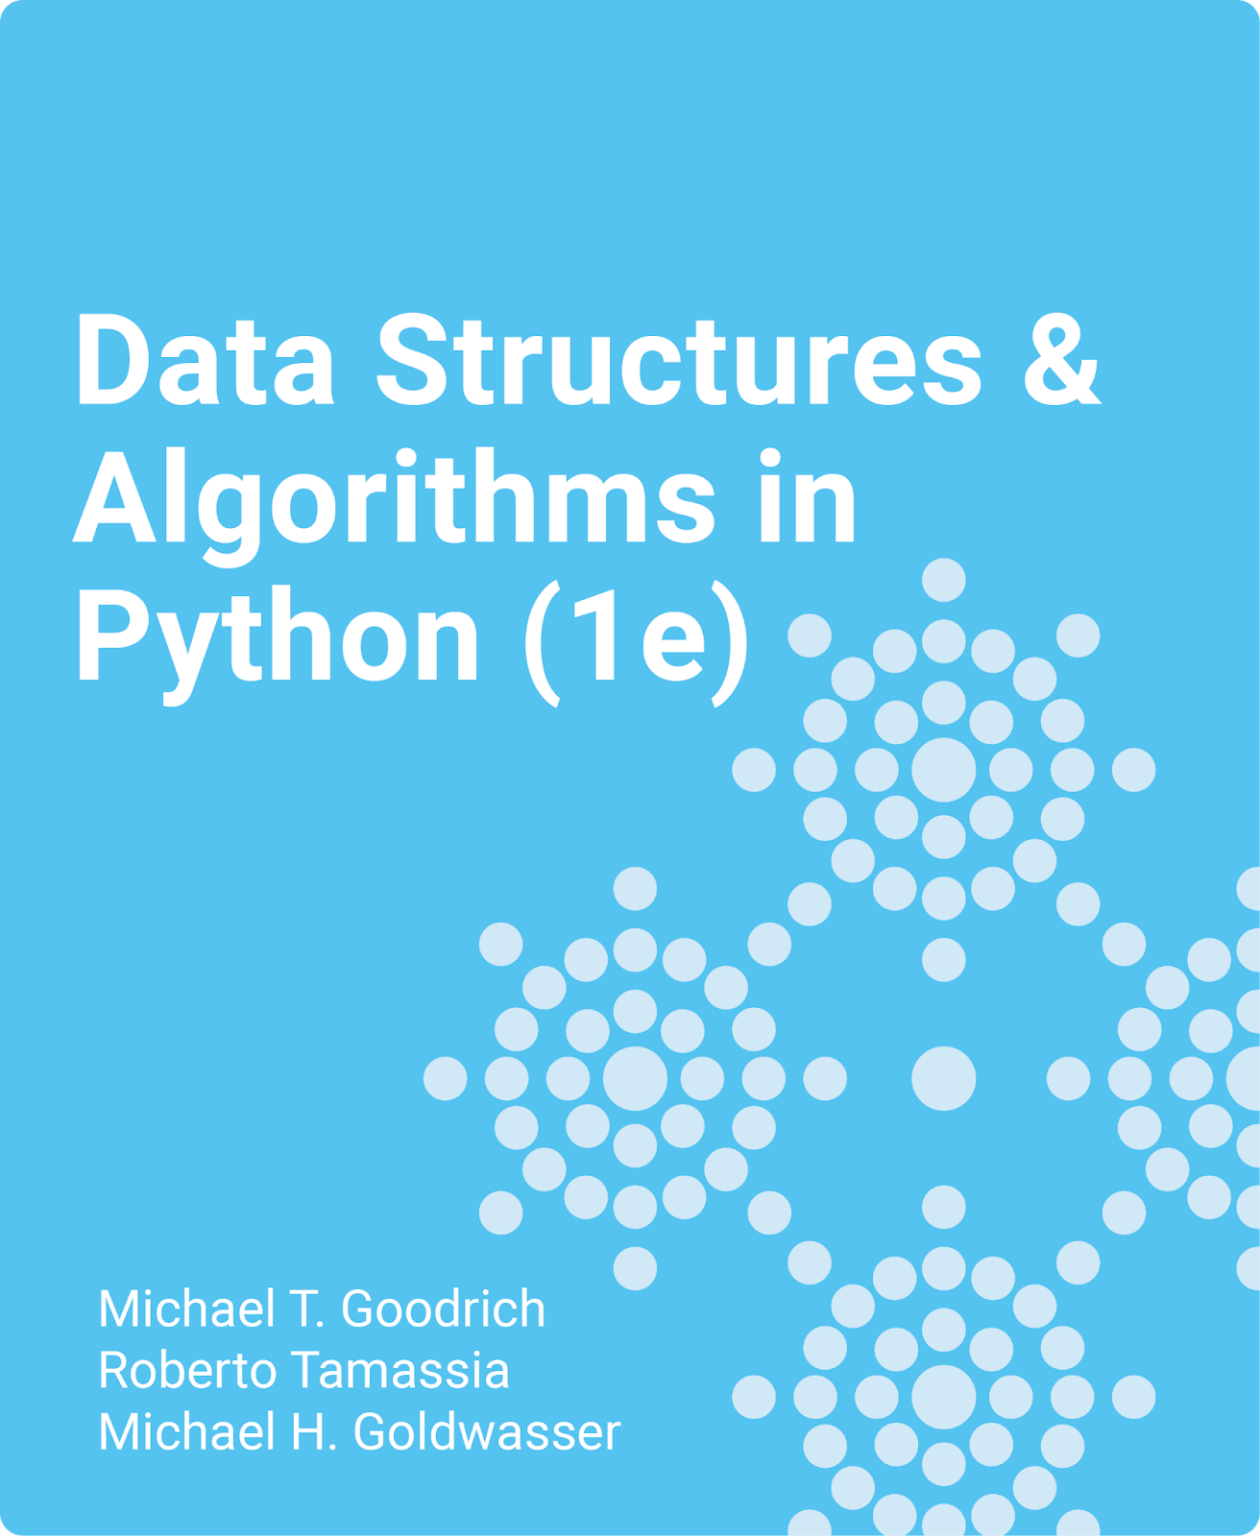 Data Structures And Algorithms In Python Goodrich Zybooks 1054